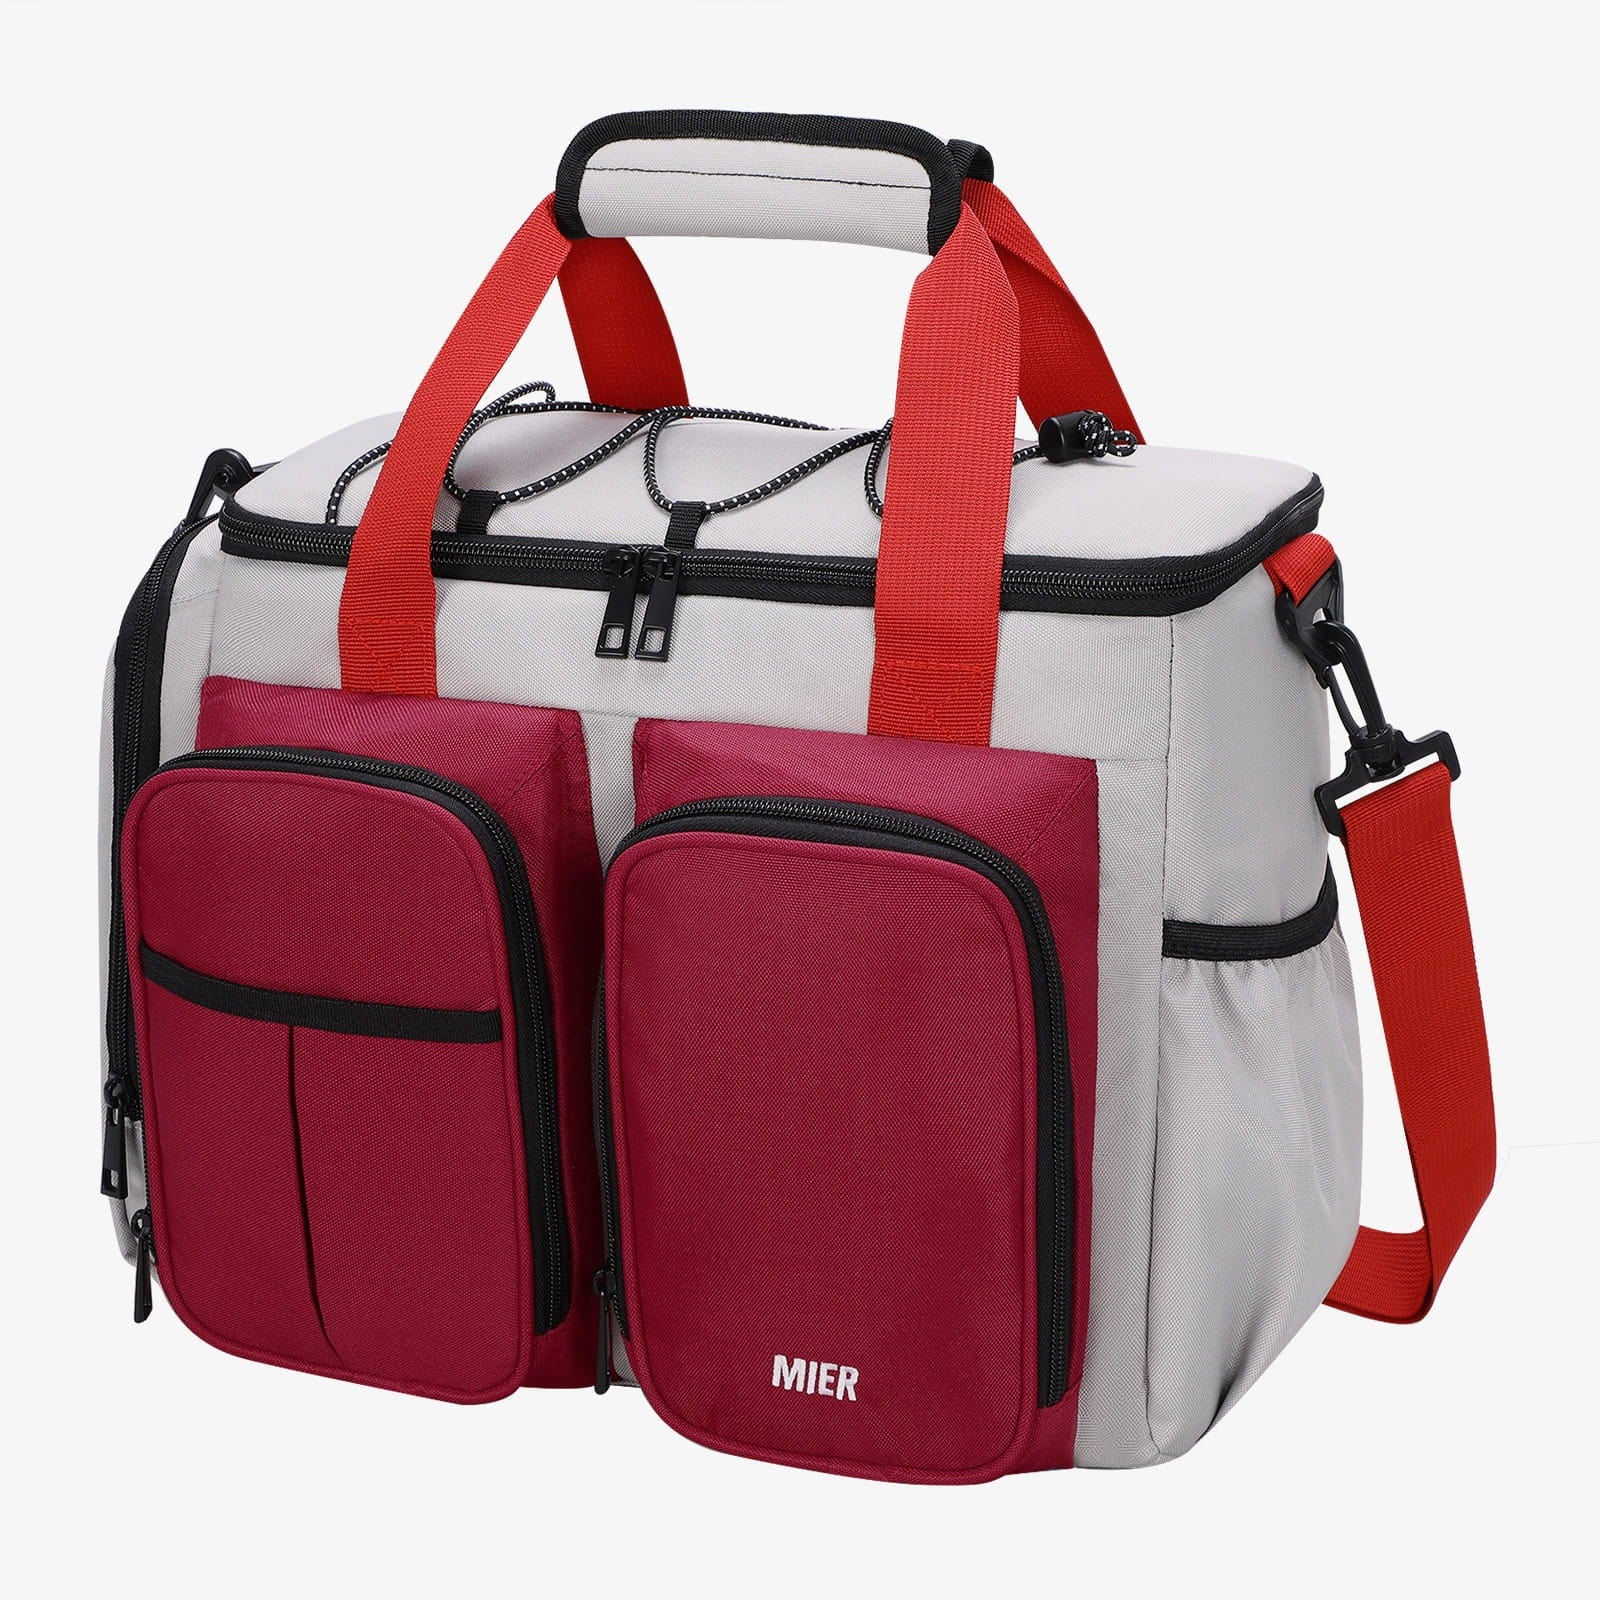 MIER Large Insulated Lunch Cooler Bag for Men Women